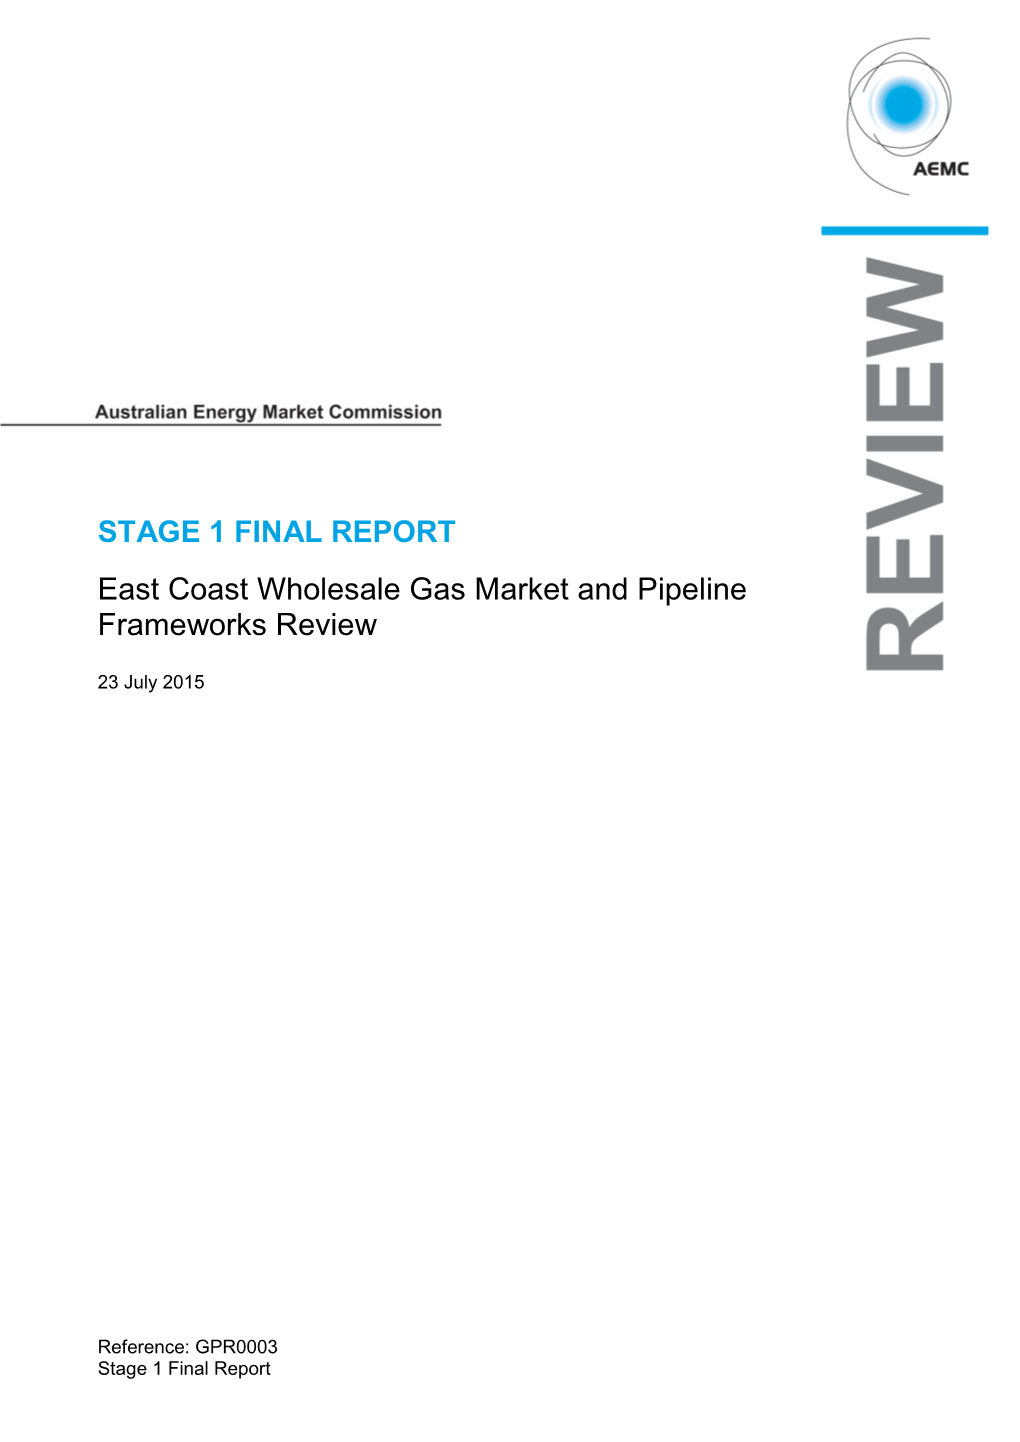 STAGE 1 FINAL REPORT East Coast Wholesale Gas Market and Pipeline Frameworks Review